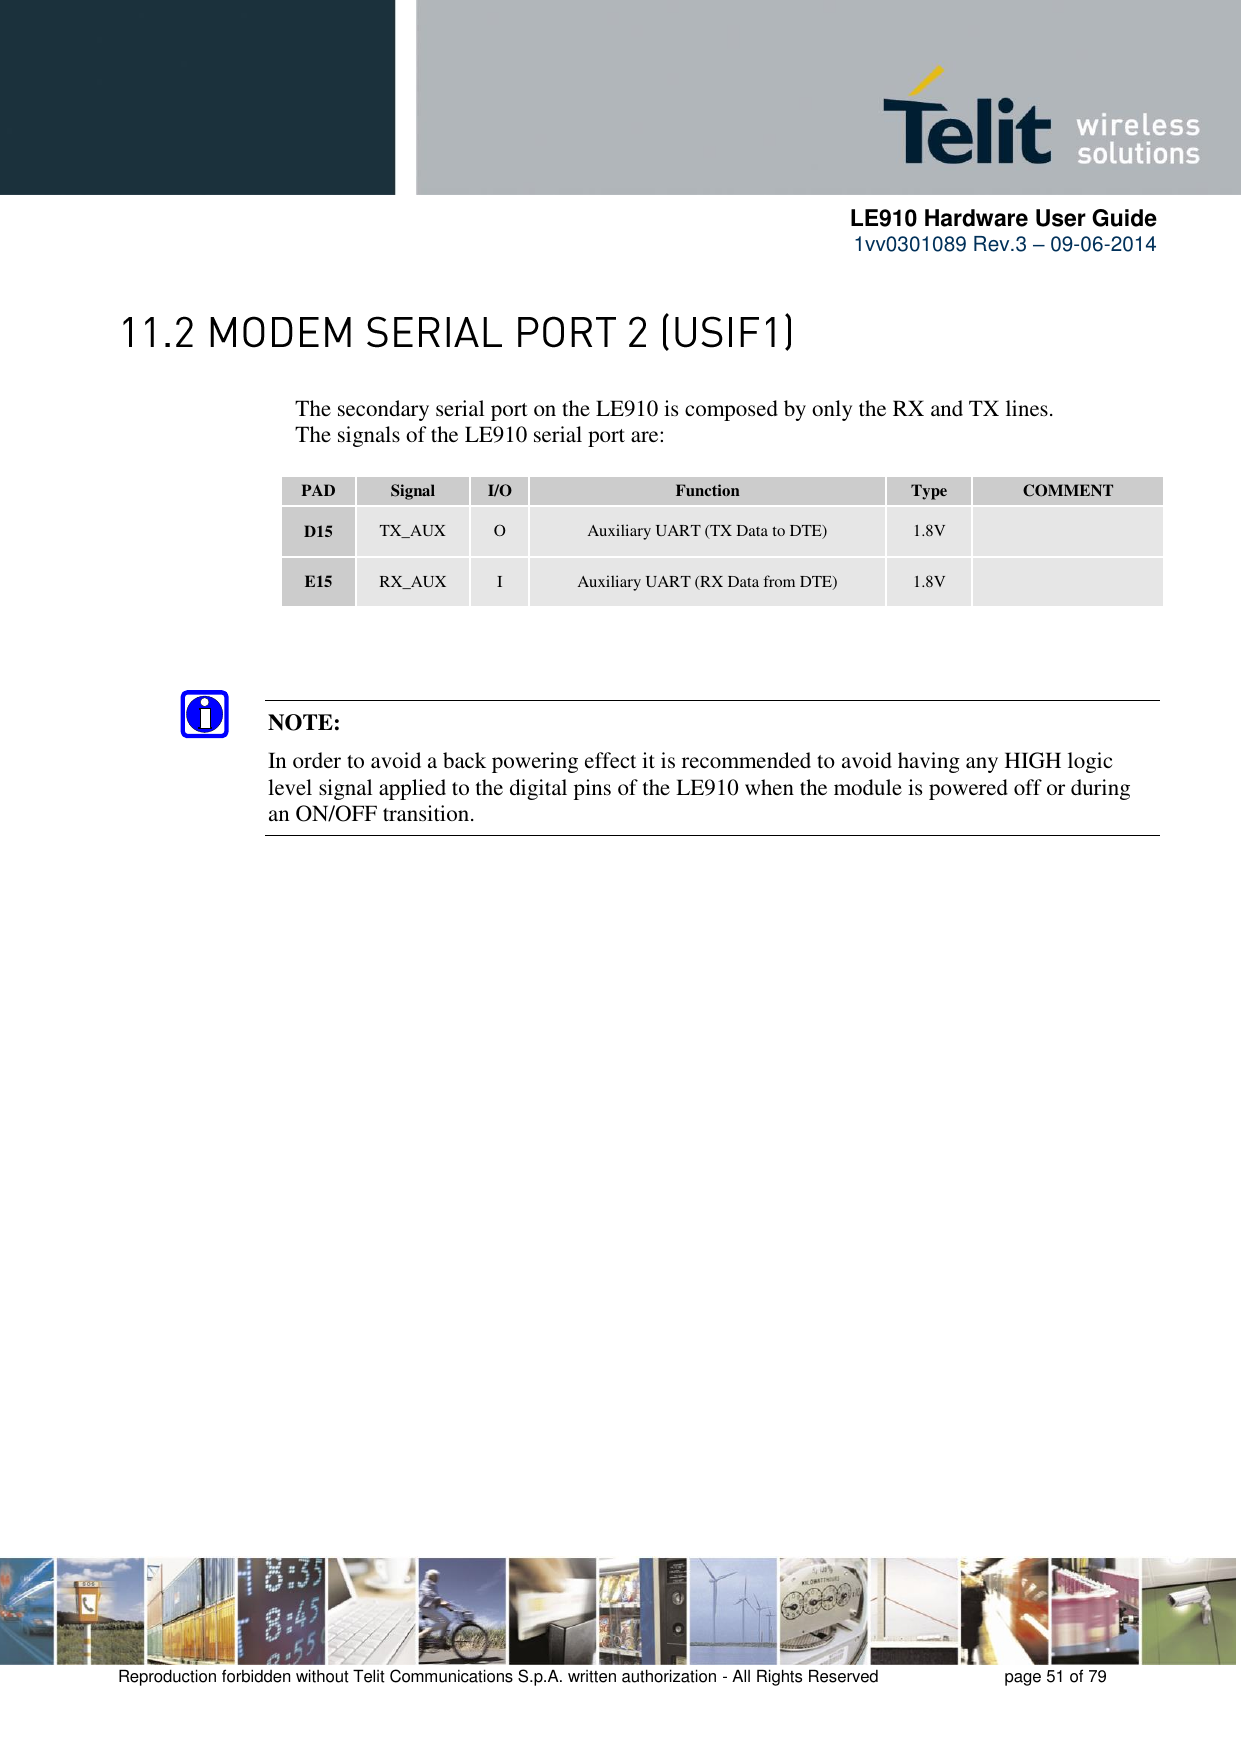      LE910 Hardware User Guide 1vv0301089 Rev.3 – 09-06-2014    Reproduction forbidden without Telit Communications S.p.A. written authorization - All Rights Reserved    page 51 of 79   The secondary serial port on the LE910 is composed by only the RX and TX lines.      The signals of the LE910 serial port are:  PAD Signal I/O Function Type COMMENT D15 TX_AUX O Auxiliary UART (TX Data to DTE) 1.8V  E15 RX_AUX I Auxiliary UART (RX Data from DTE) 1.8V     NOTE: In order to avoid a back powering effect it is recommended to avoid having any HIGH logic level signal applied to the digital pins of the LE910 when the module is powered off or during an ON/OFF transition.                          